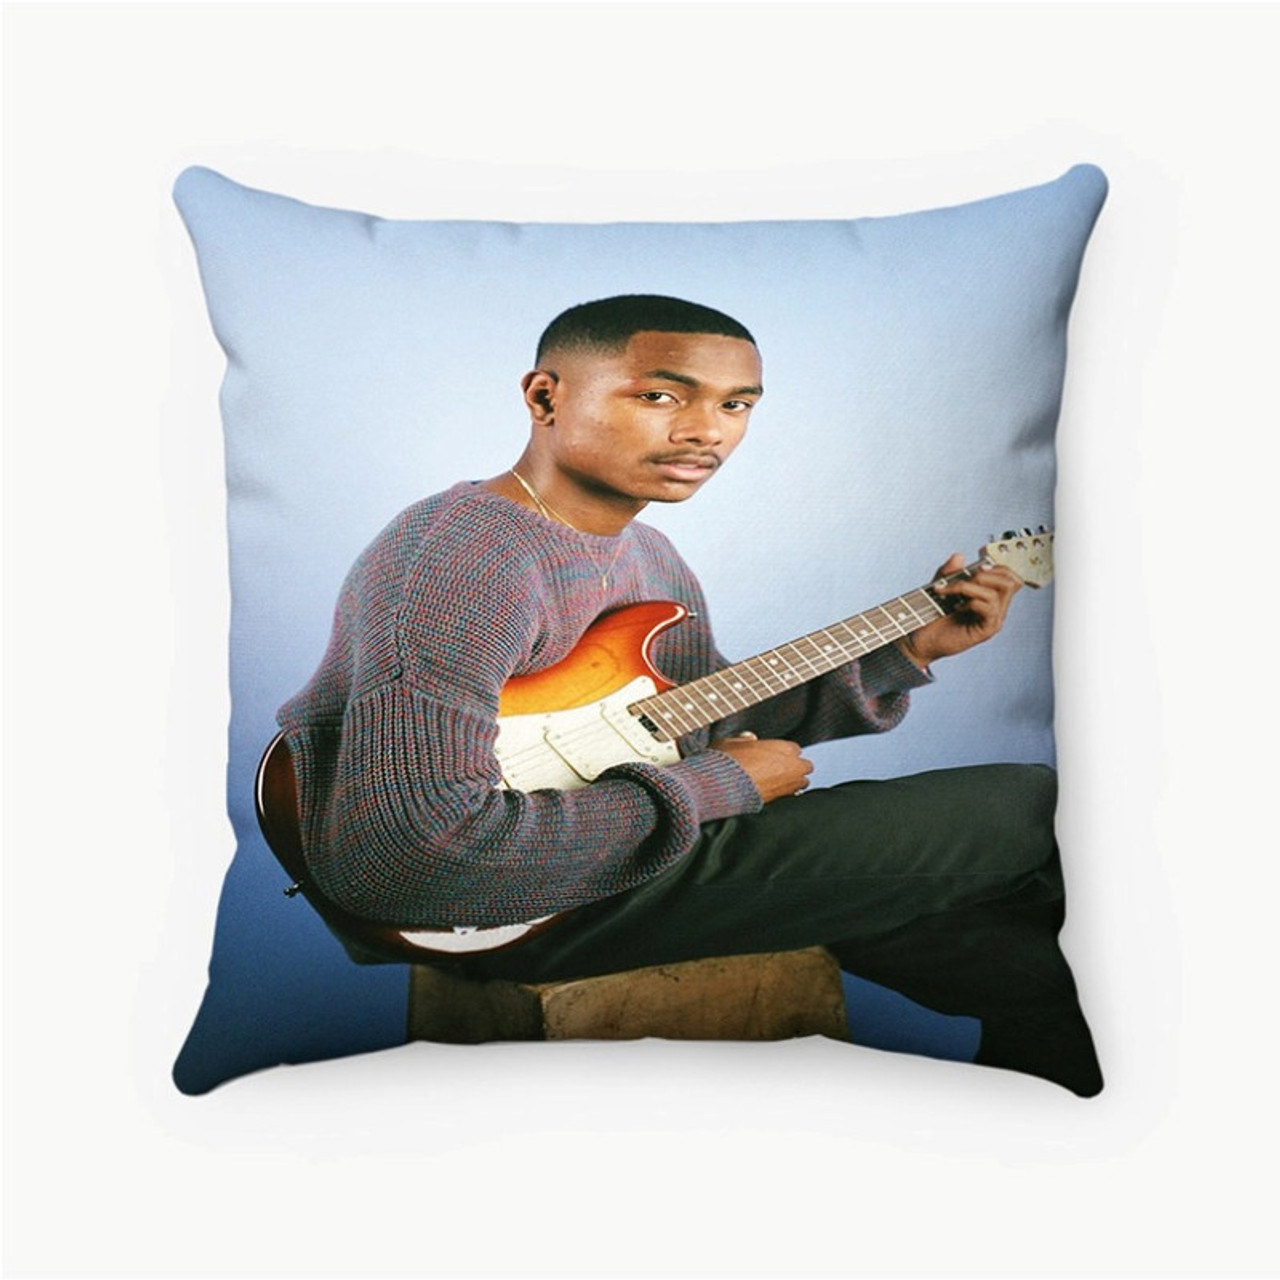 Custom Pillow Cases  Personalized Photo Pillow Cases or Covers